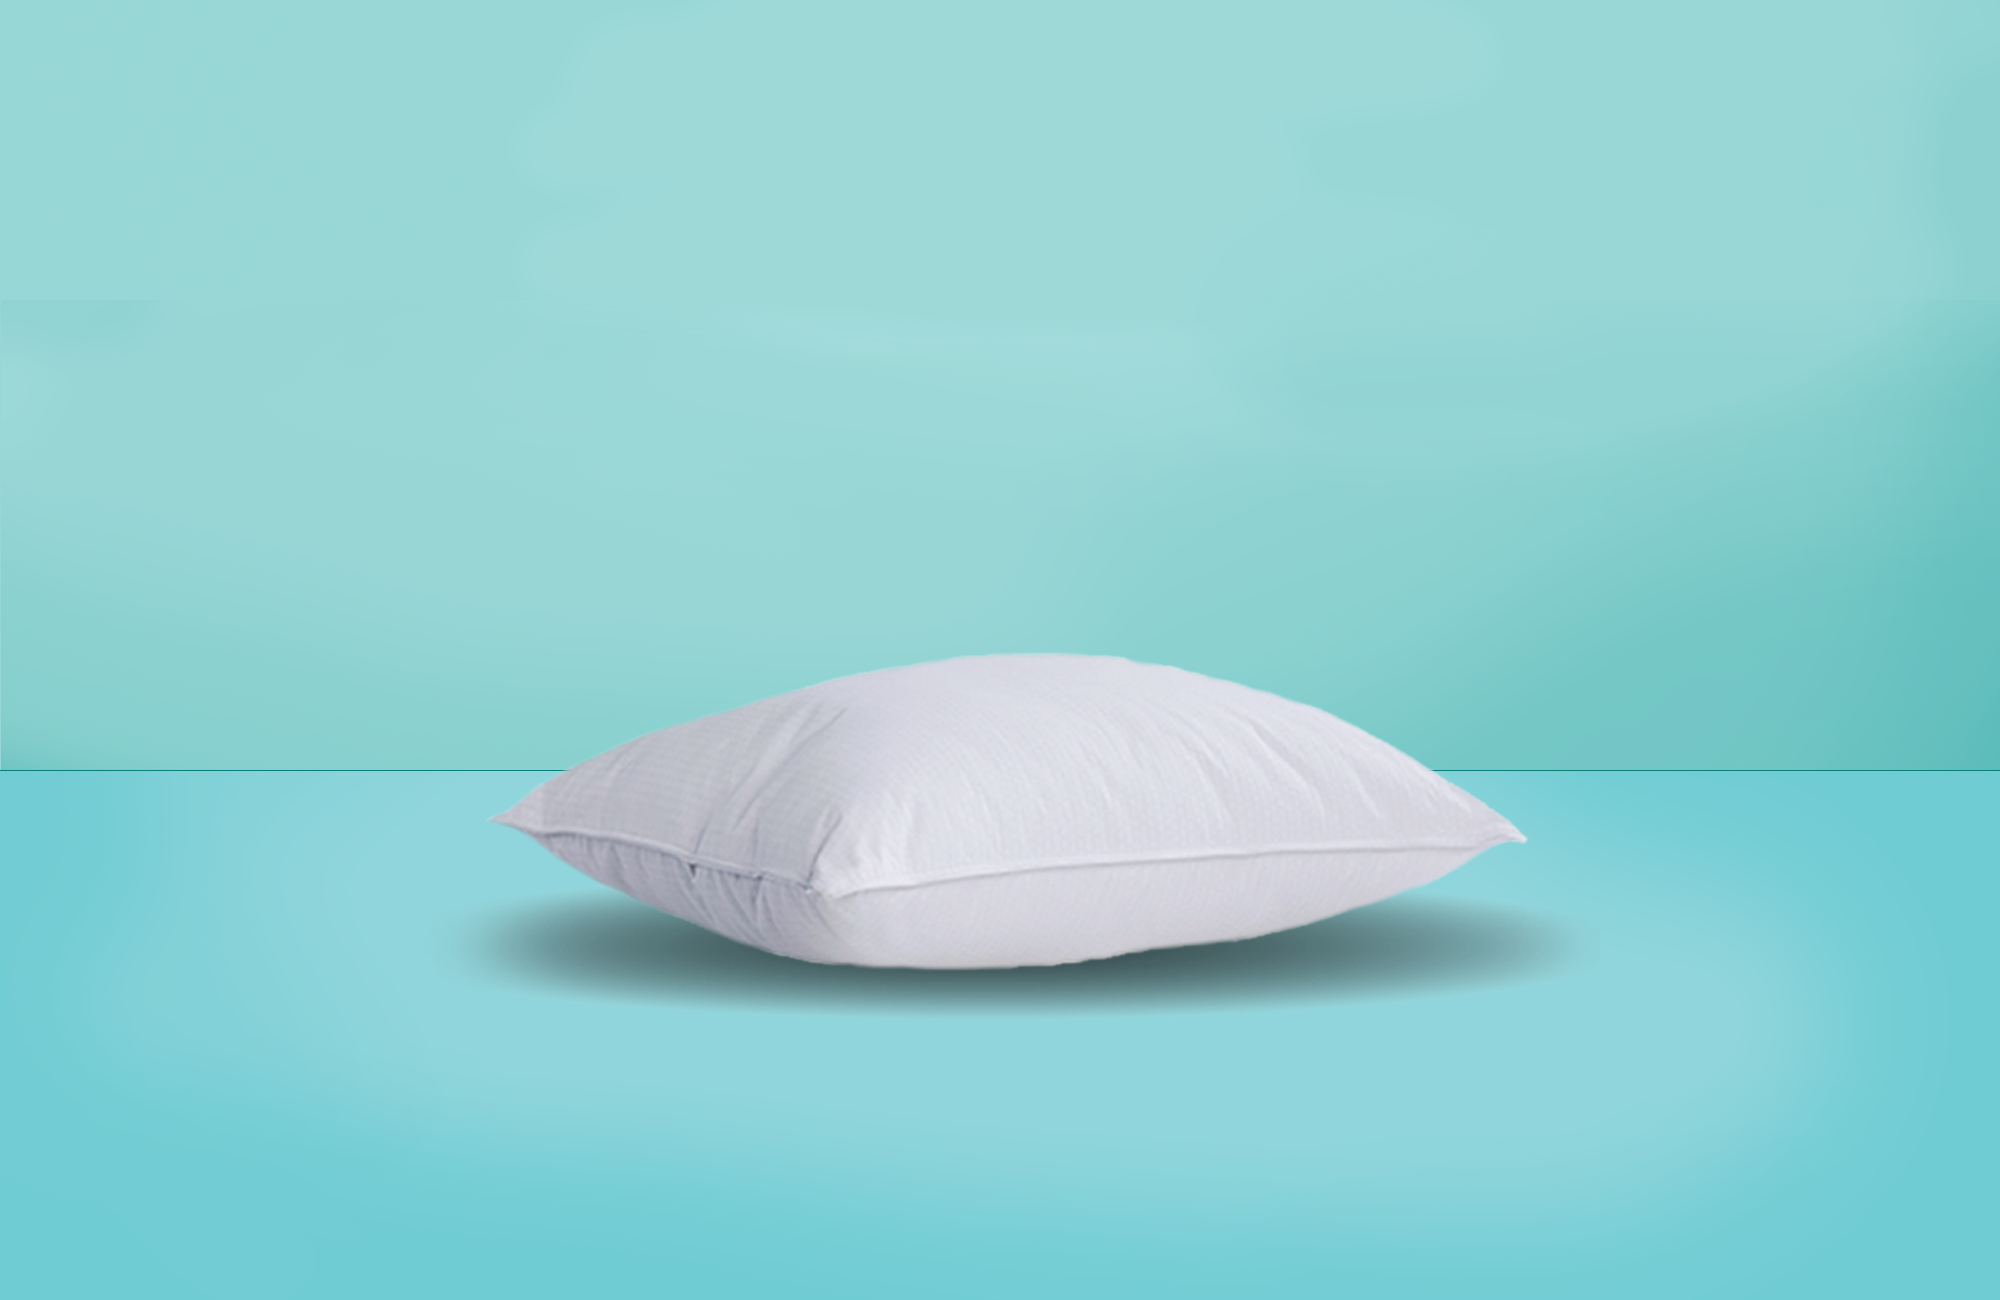 12 Best Pillows for Sitting Up in Bed, According to Experts